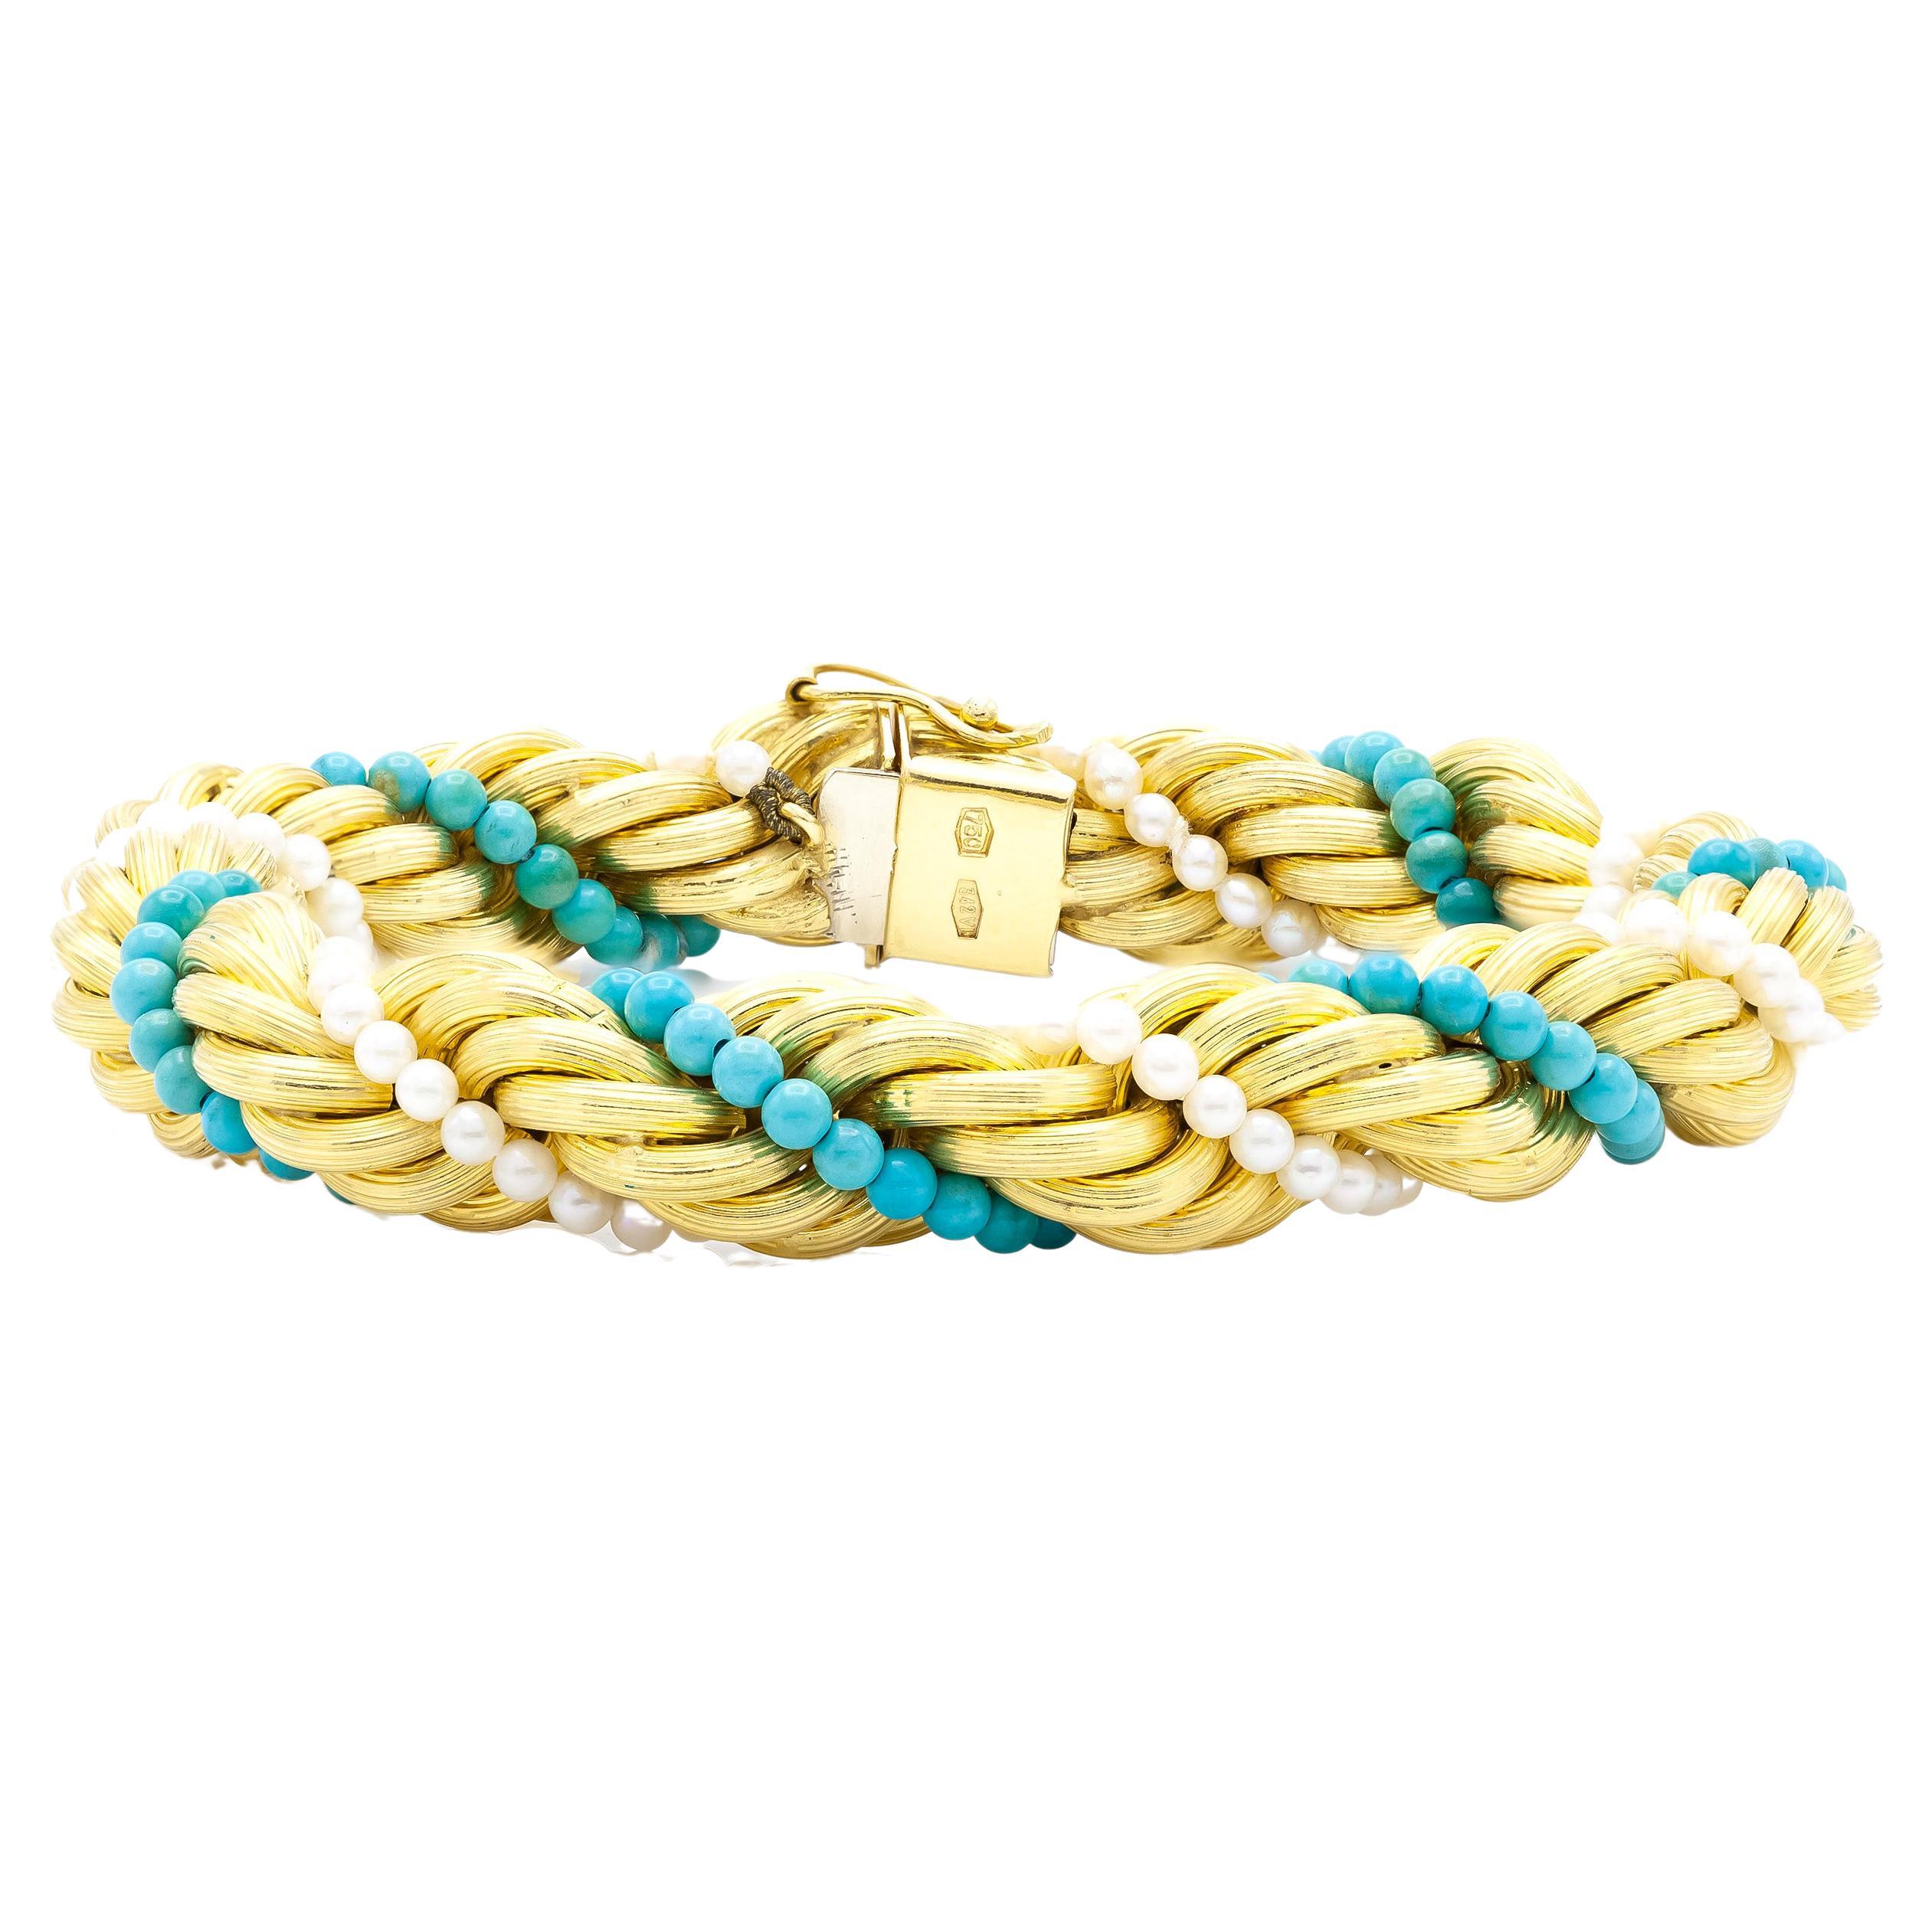 18K Gold Rope Chain Bracelet with Turquoises and Pearls